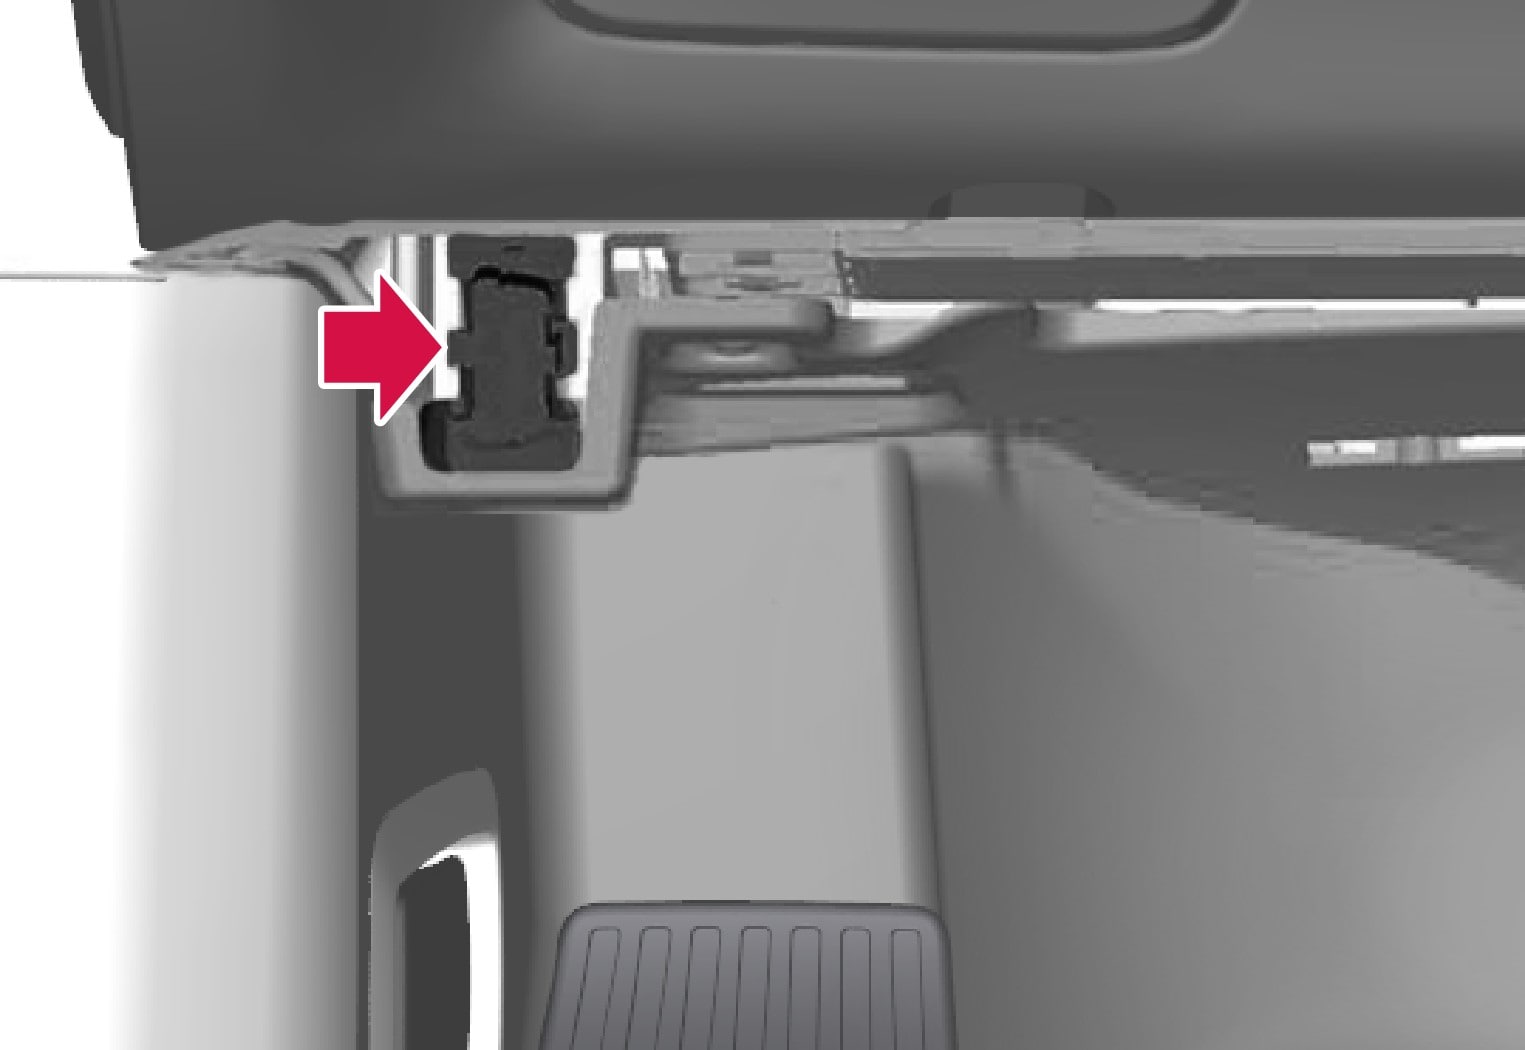 The diagnostic socket is located under the instrument panel and on the same side as the steering wheel.